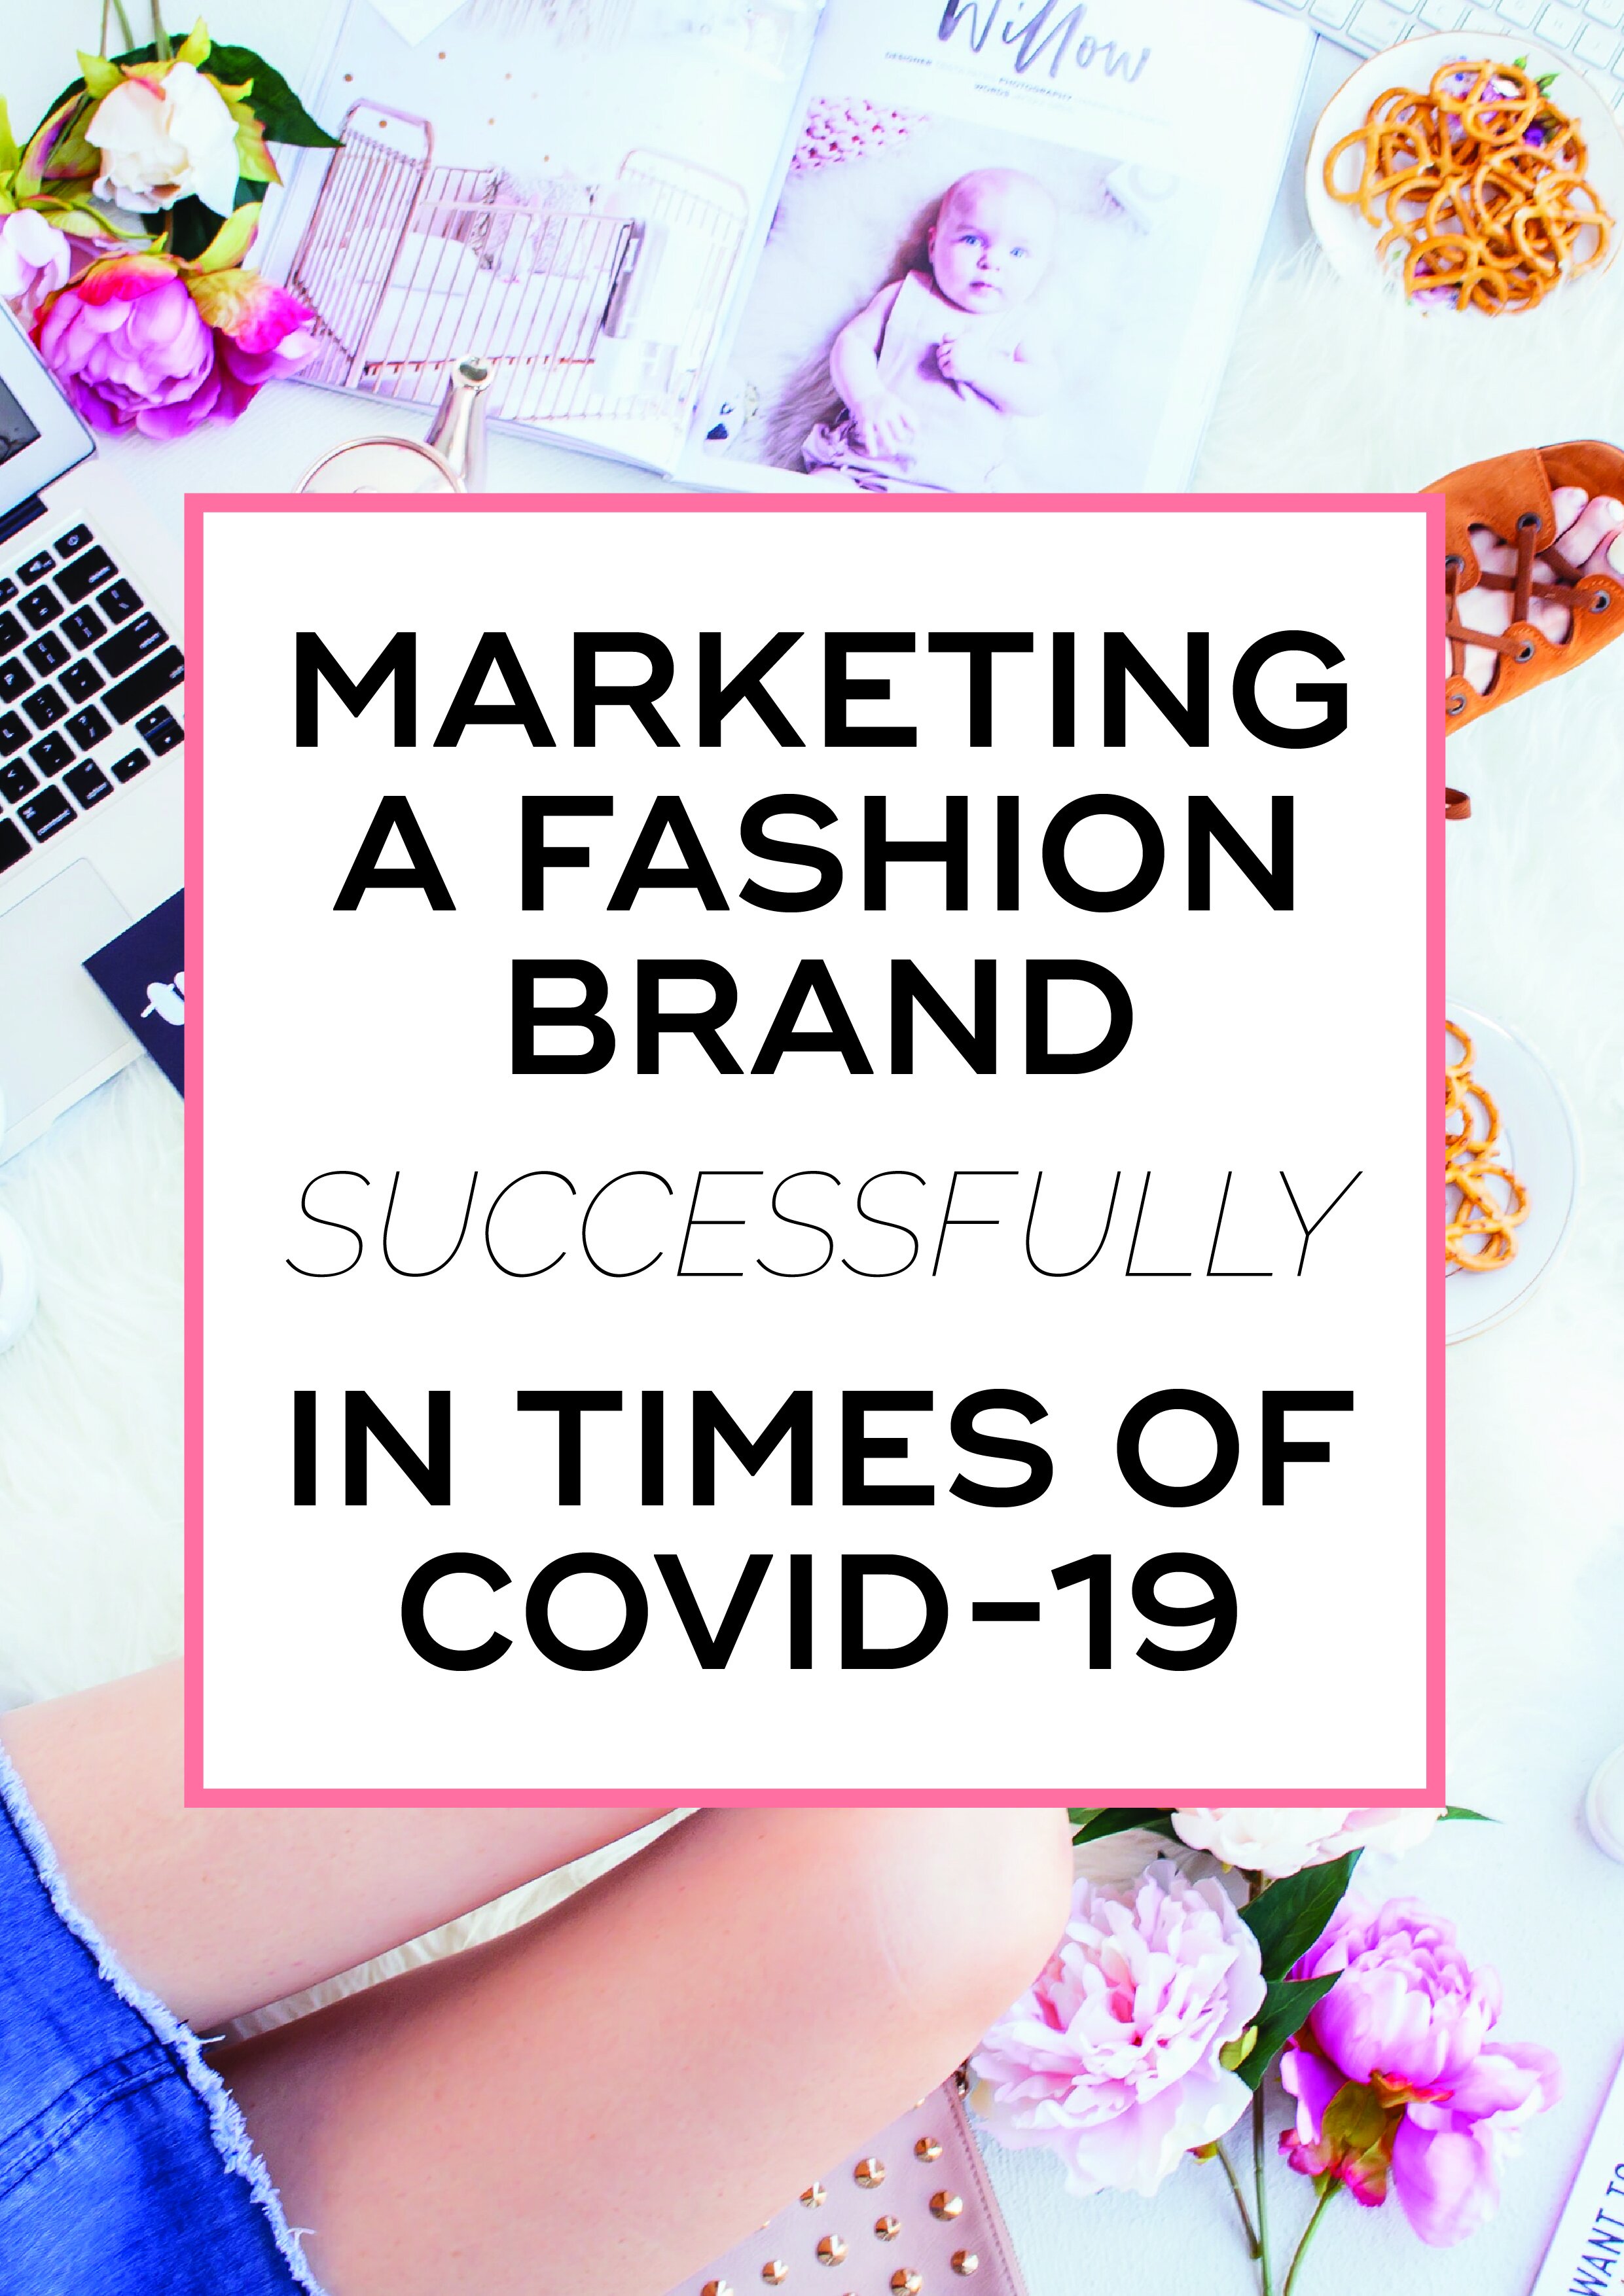 Marketing a Fashion Brand Successfully in Times of COVID-19 1.jpg